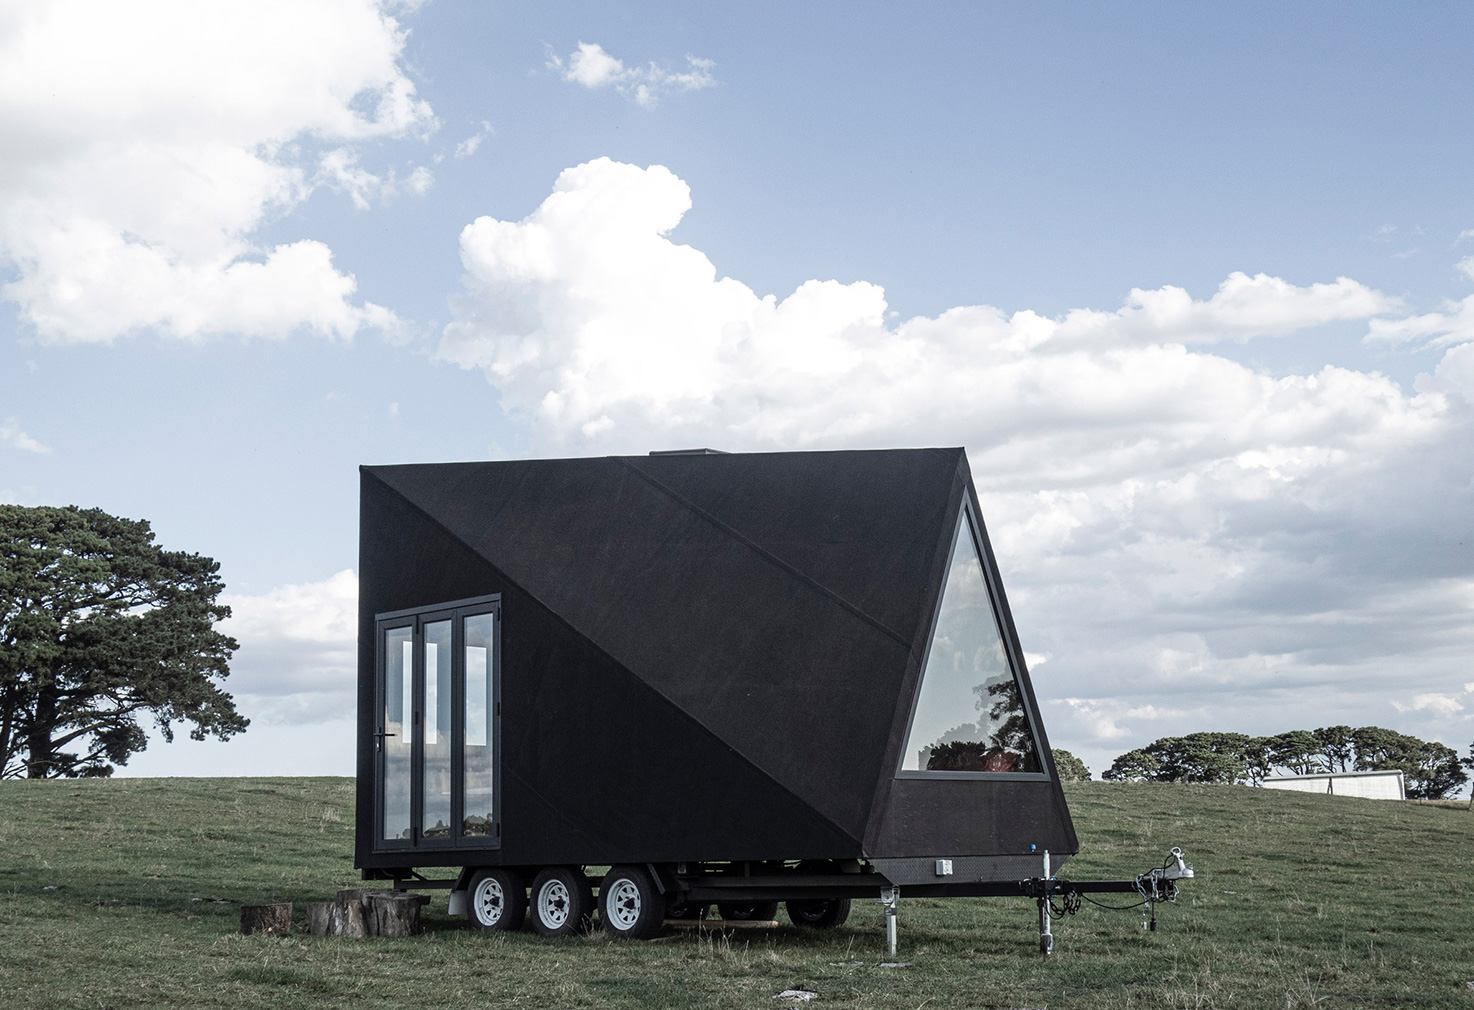 Base Cabin is a minimalist tiny home you can tow